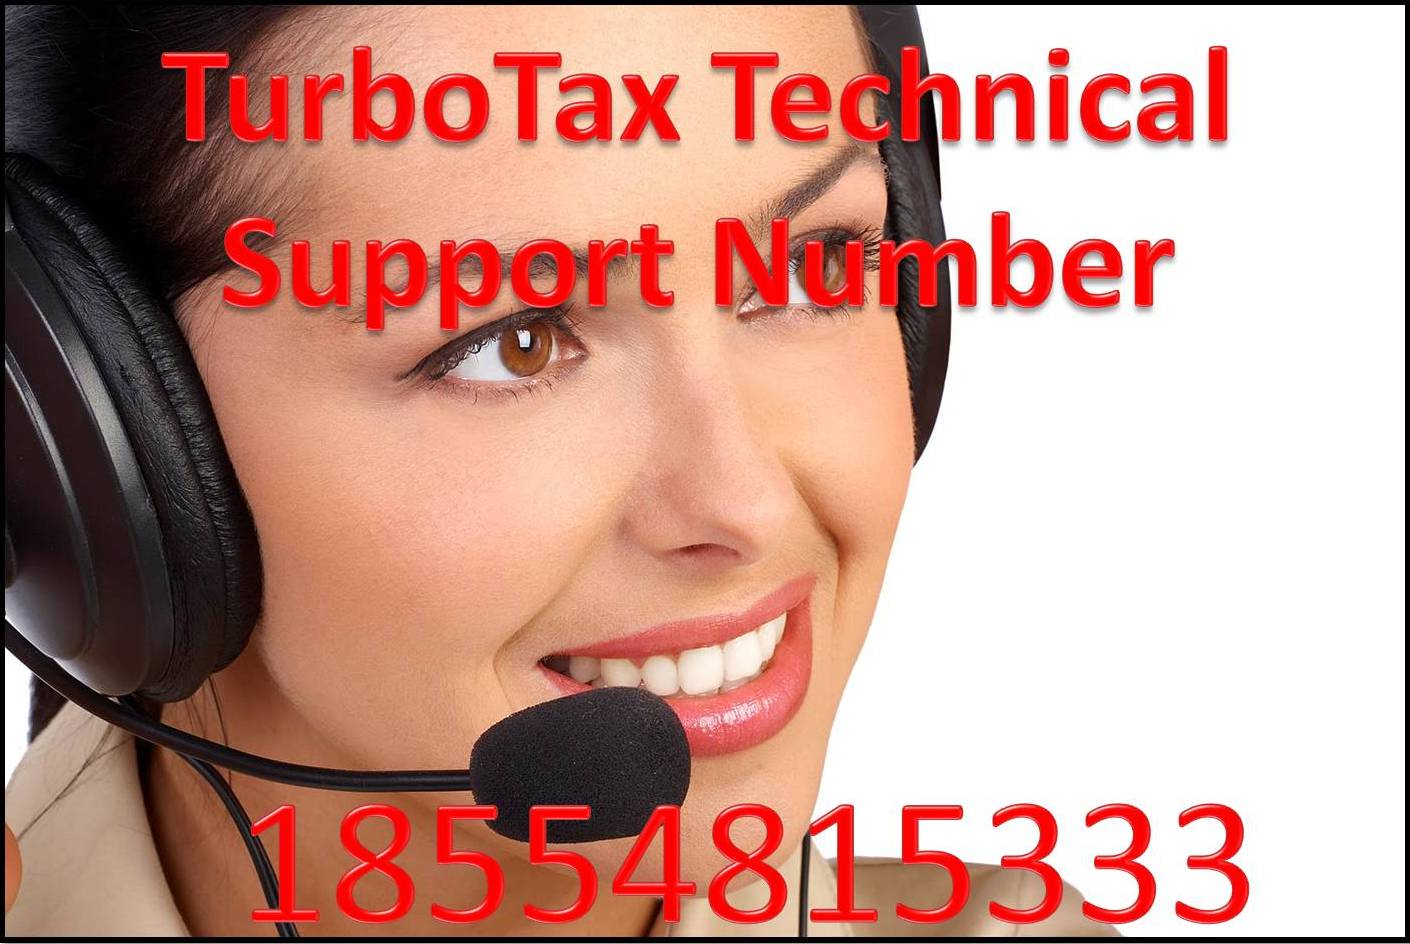 How do you find contact information for Turbo Tax?